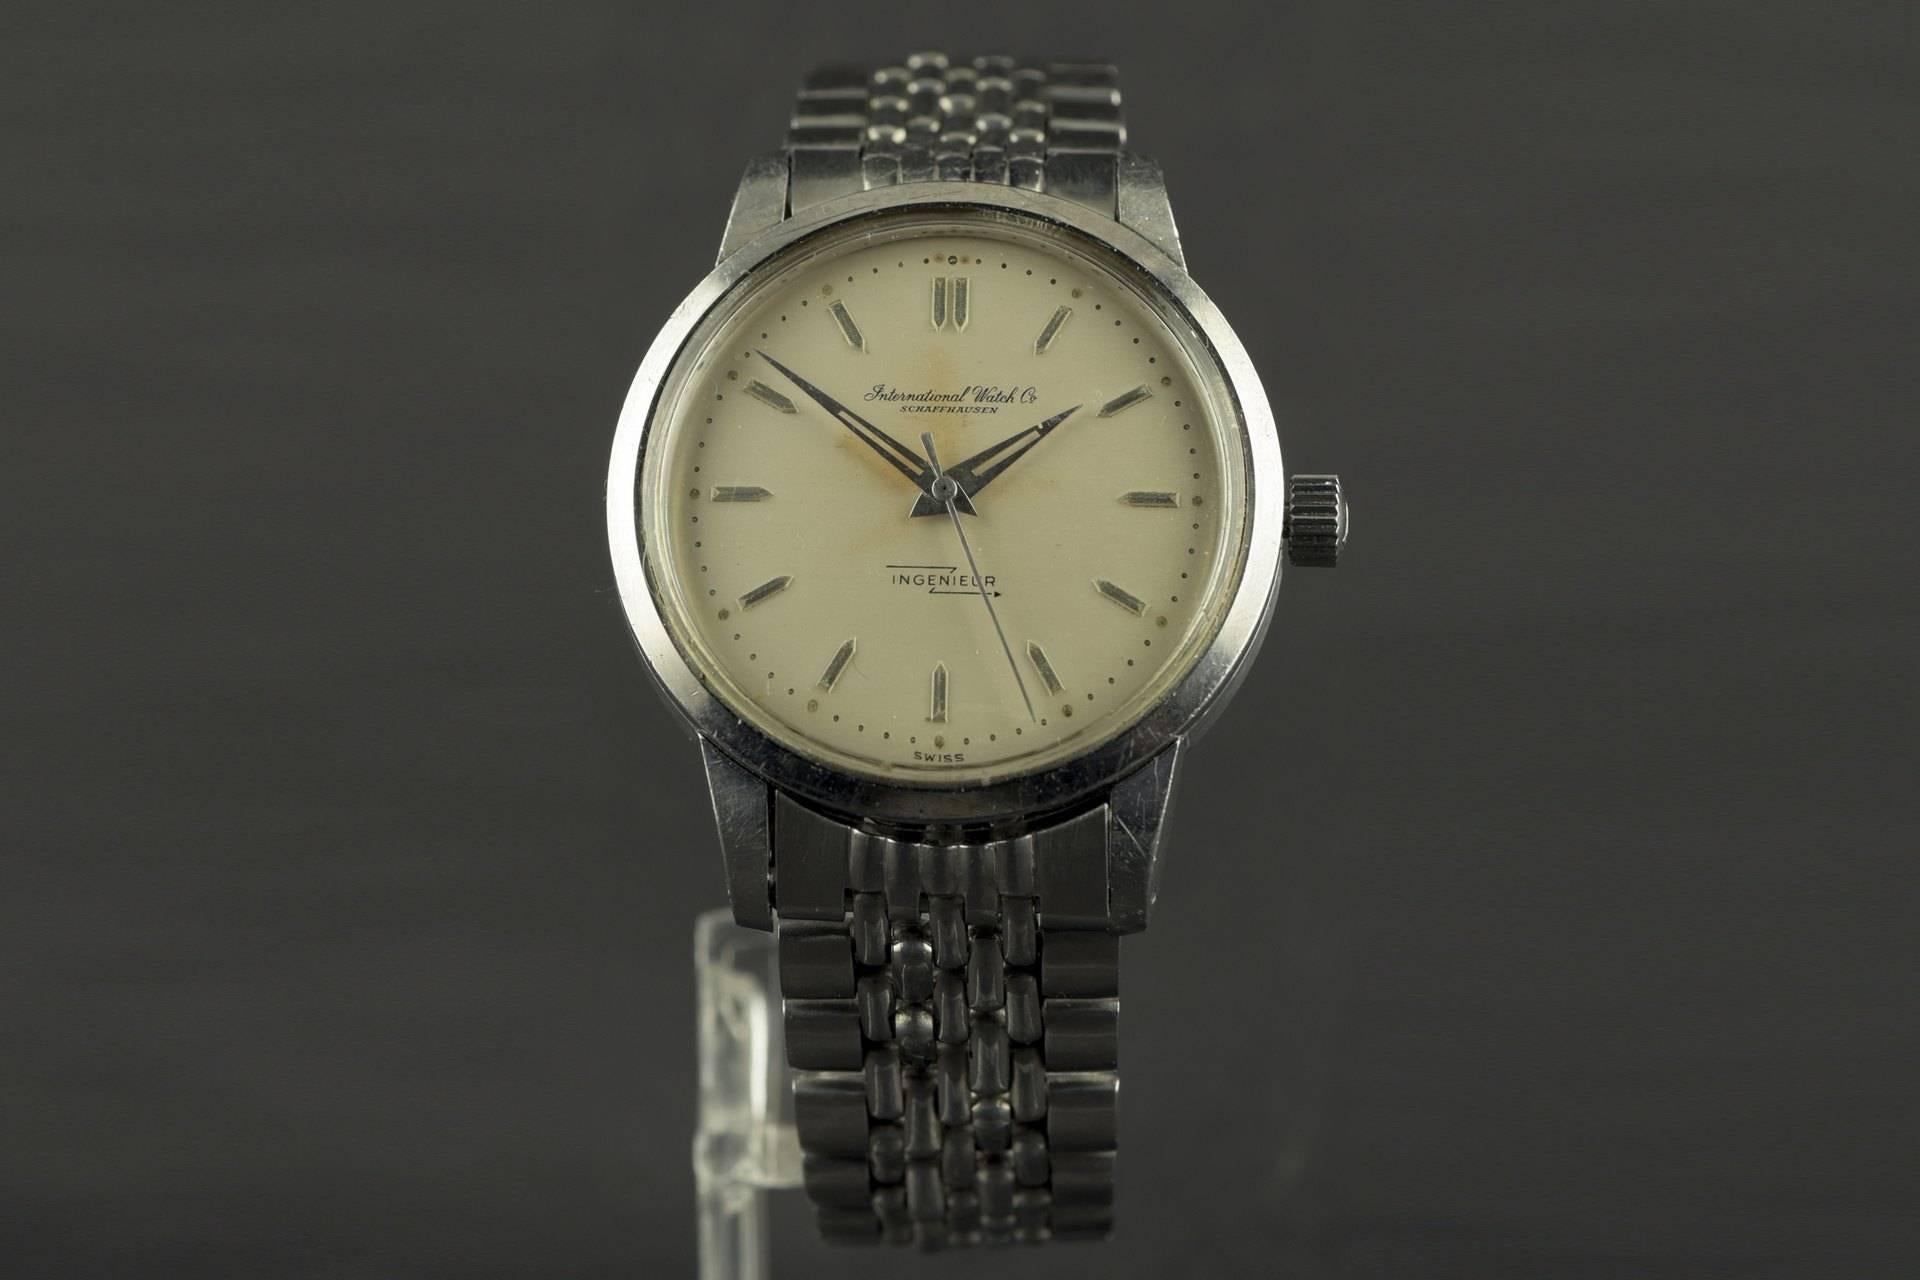 Here we offer a rare IWC INGENIEUR ref. 666A from 1958. Still in good original condition show movement and case  only age related signs of unse, only the original dial shows its age. The INGENIEUR was the flagship of the IWC collection in that time,